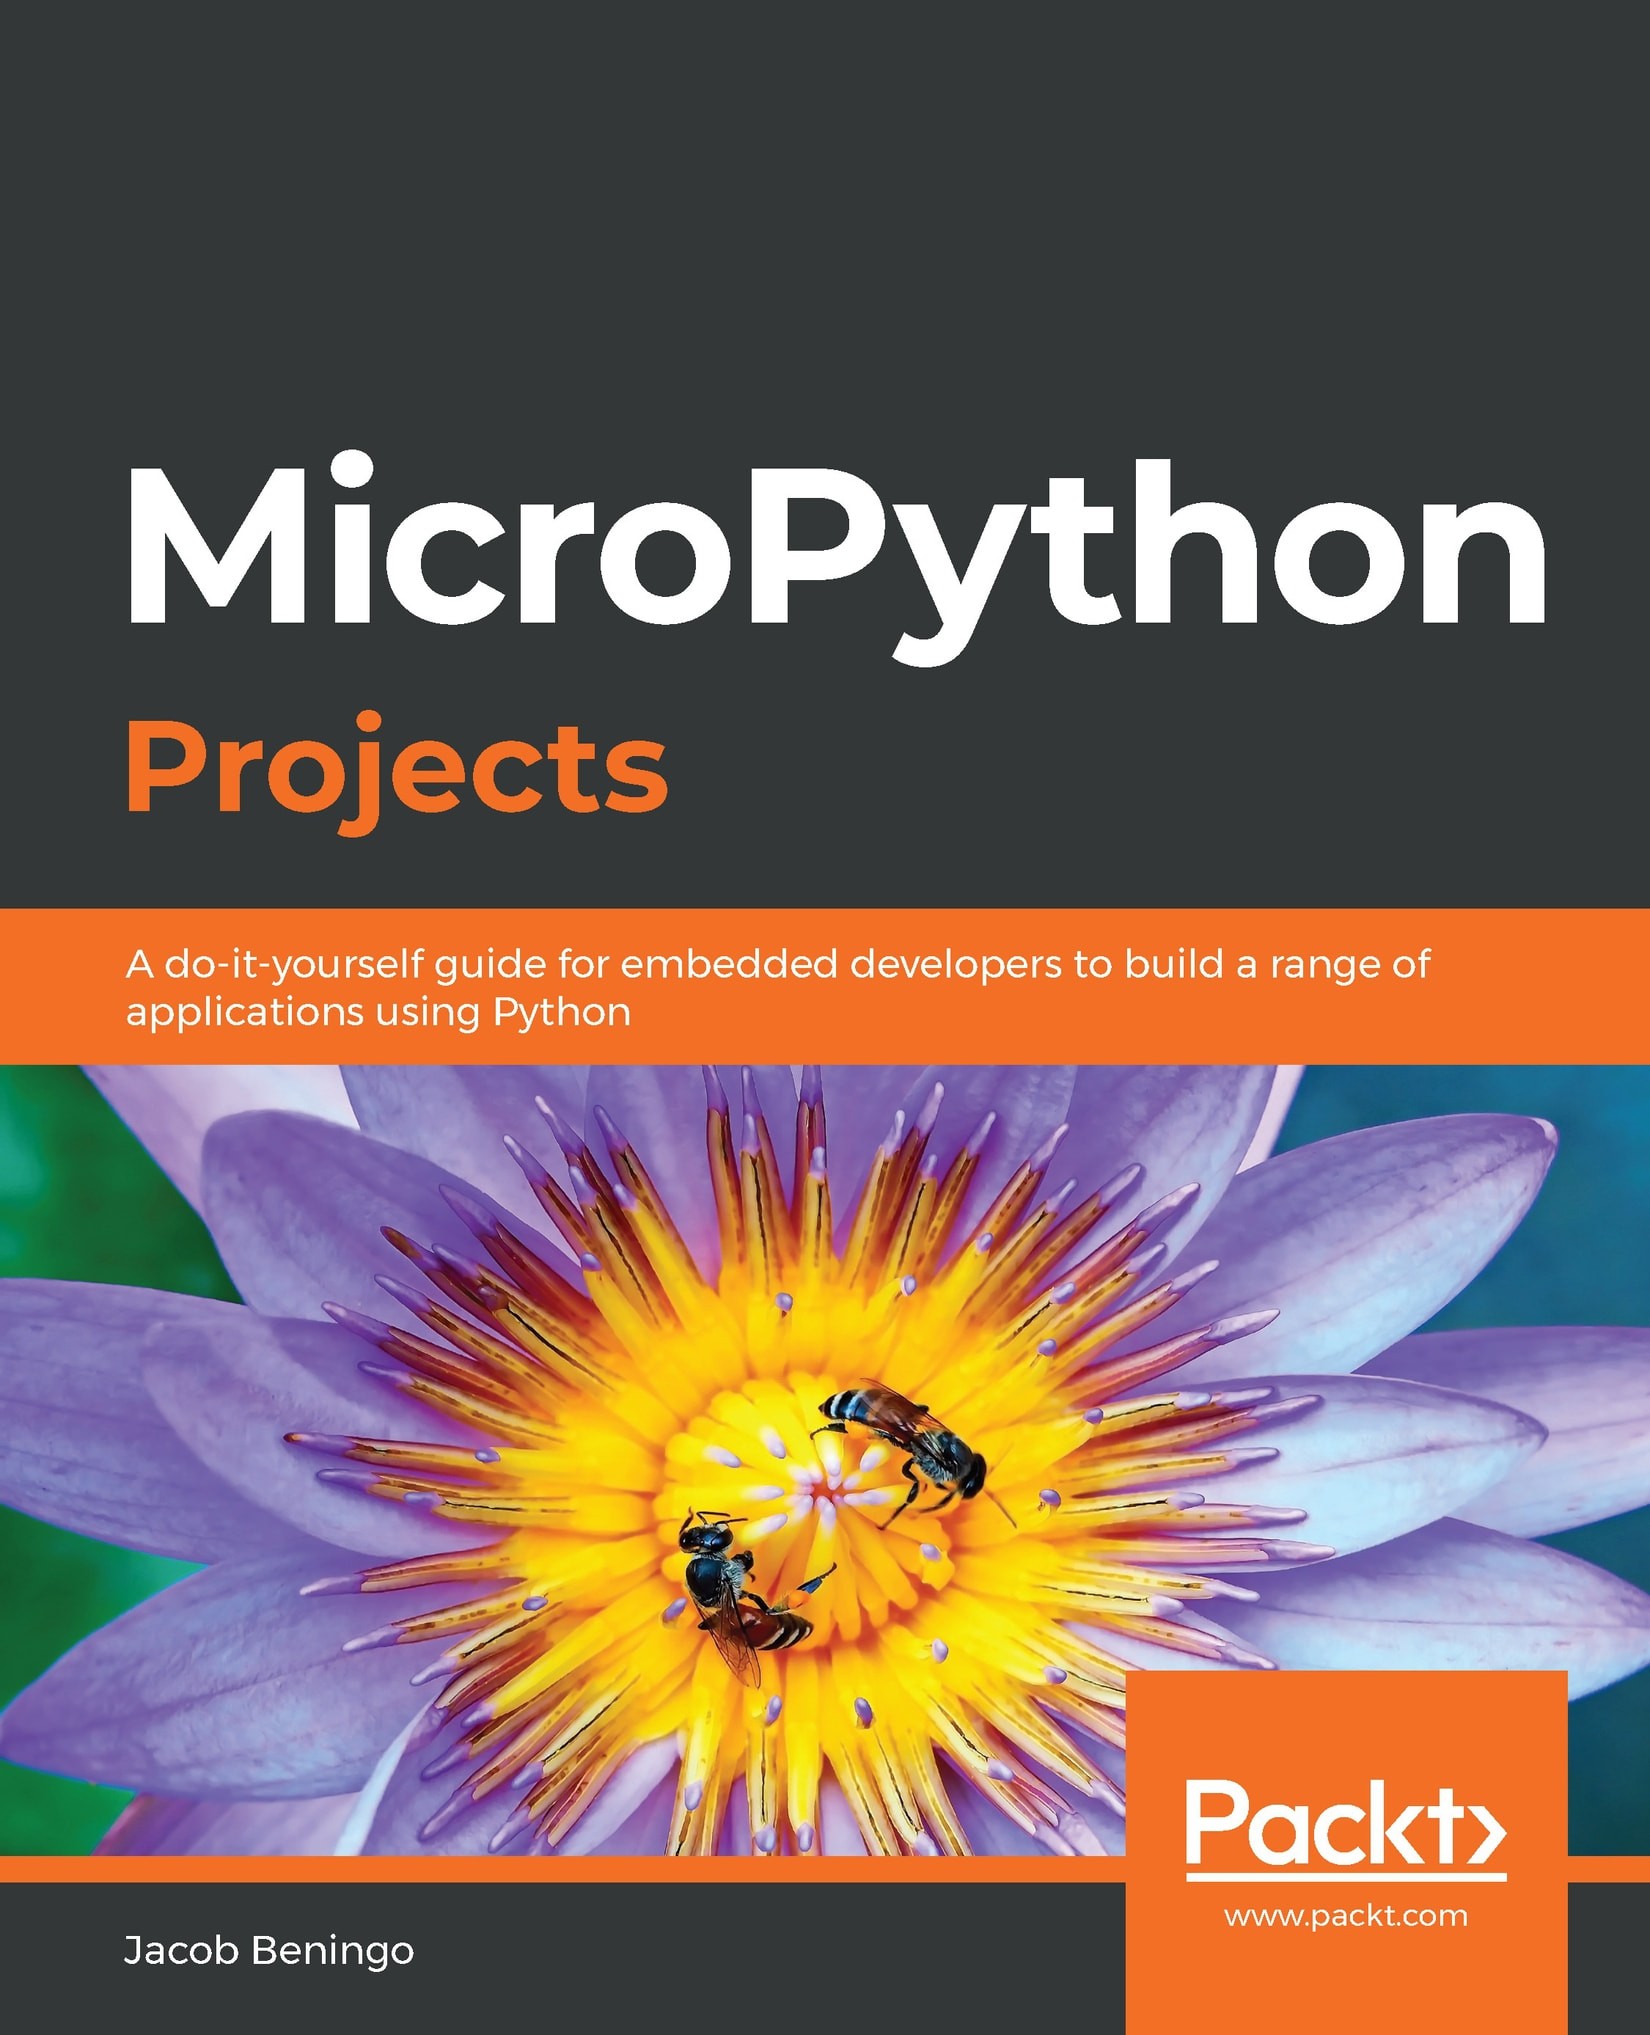 MicroPython Projects: A Do-It-Yourself Guide for Embedded Developers to Build a Range of Applications Using Python